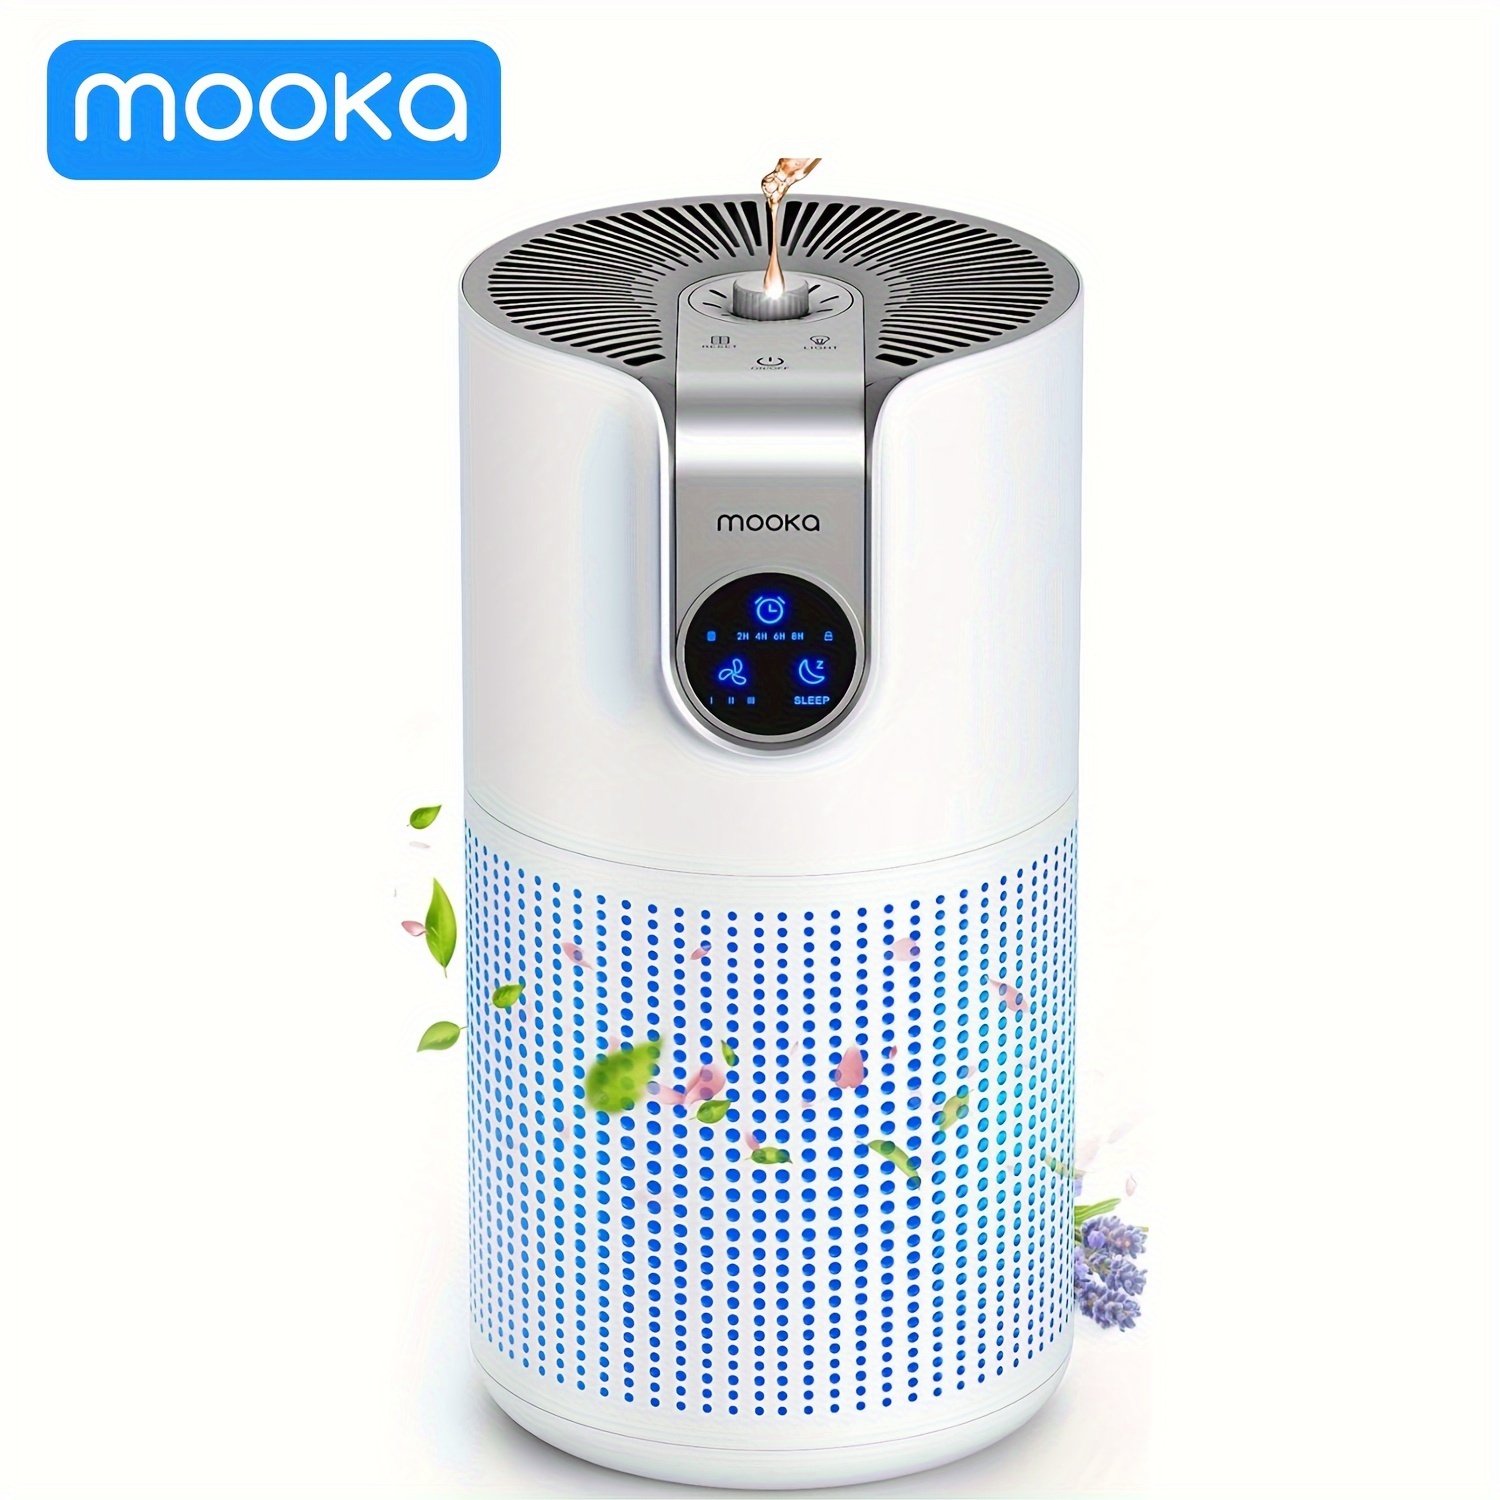 

Air Purifiers For Home Large Room Up To 1500ft², Mooka Hepa For Bedroom Pets Kitchen, Air Filter Cleaner For Smell Pollen Dust Dander Odor, 15db, M03, White